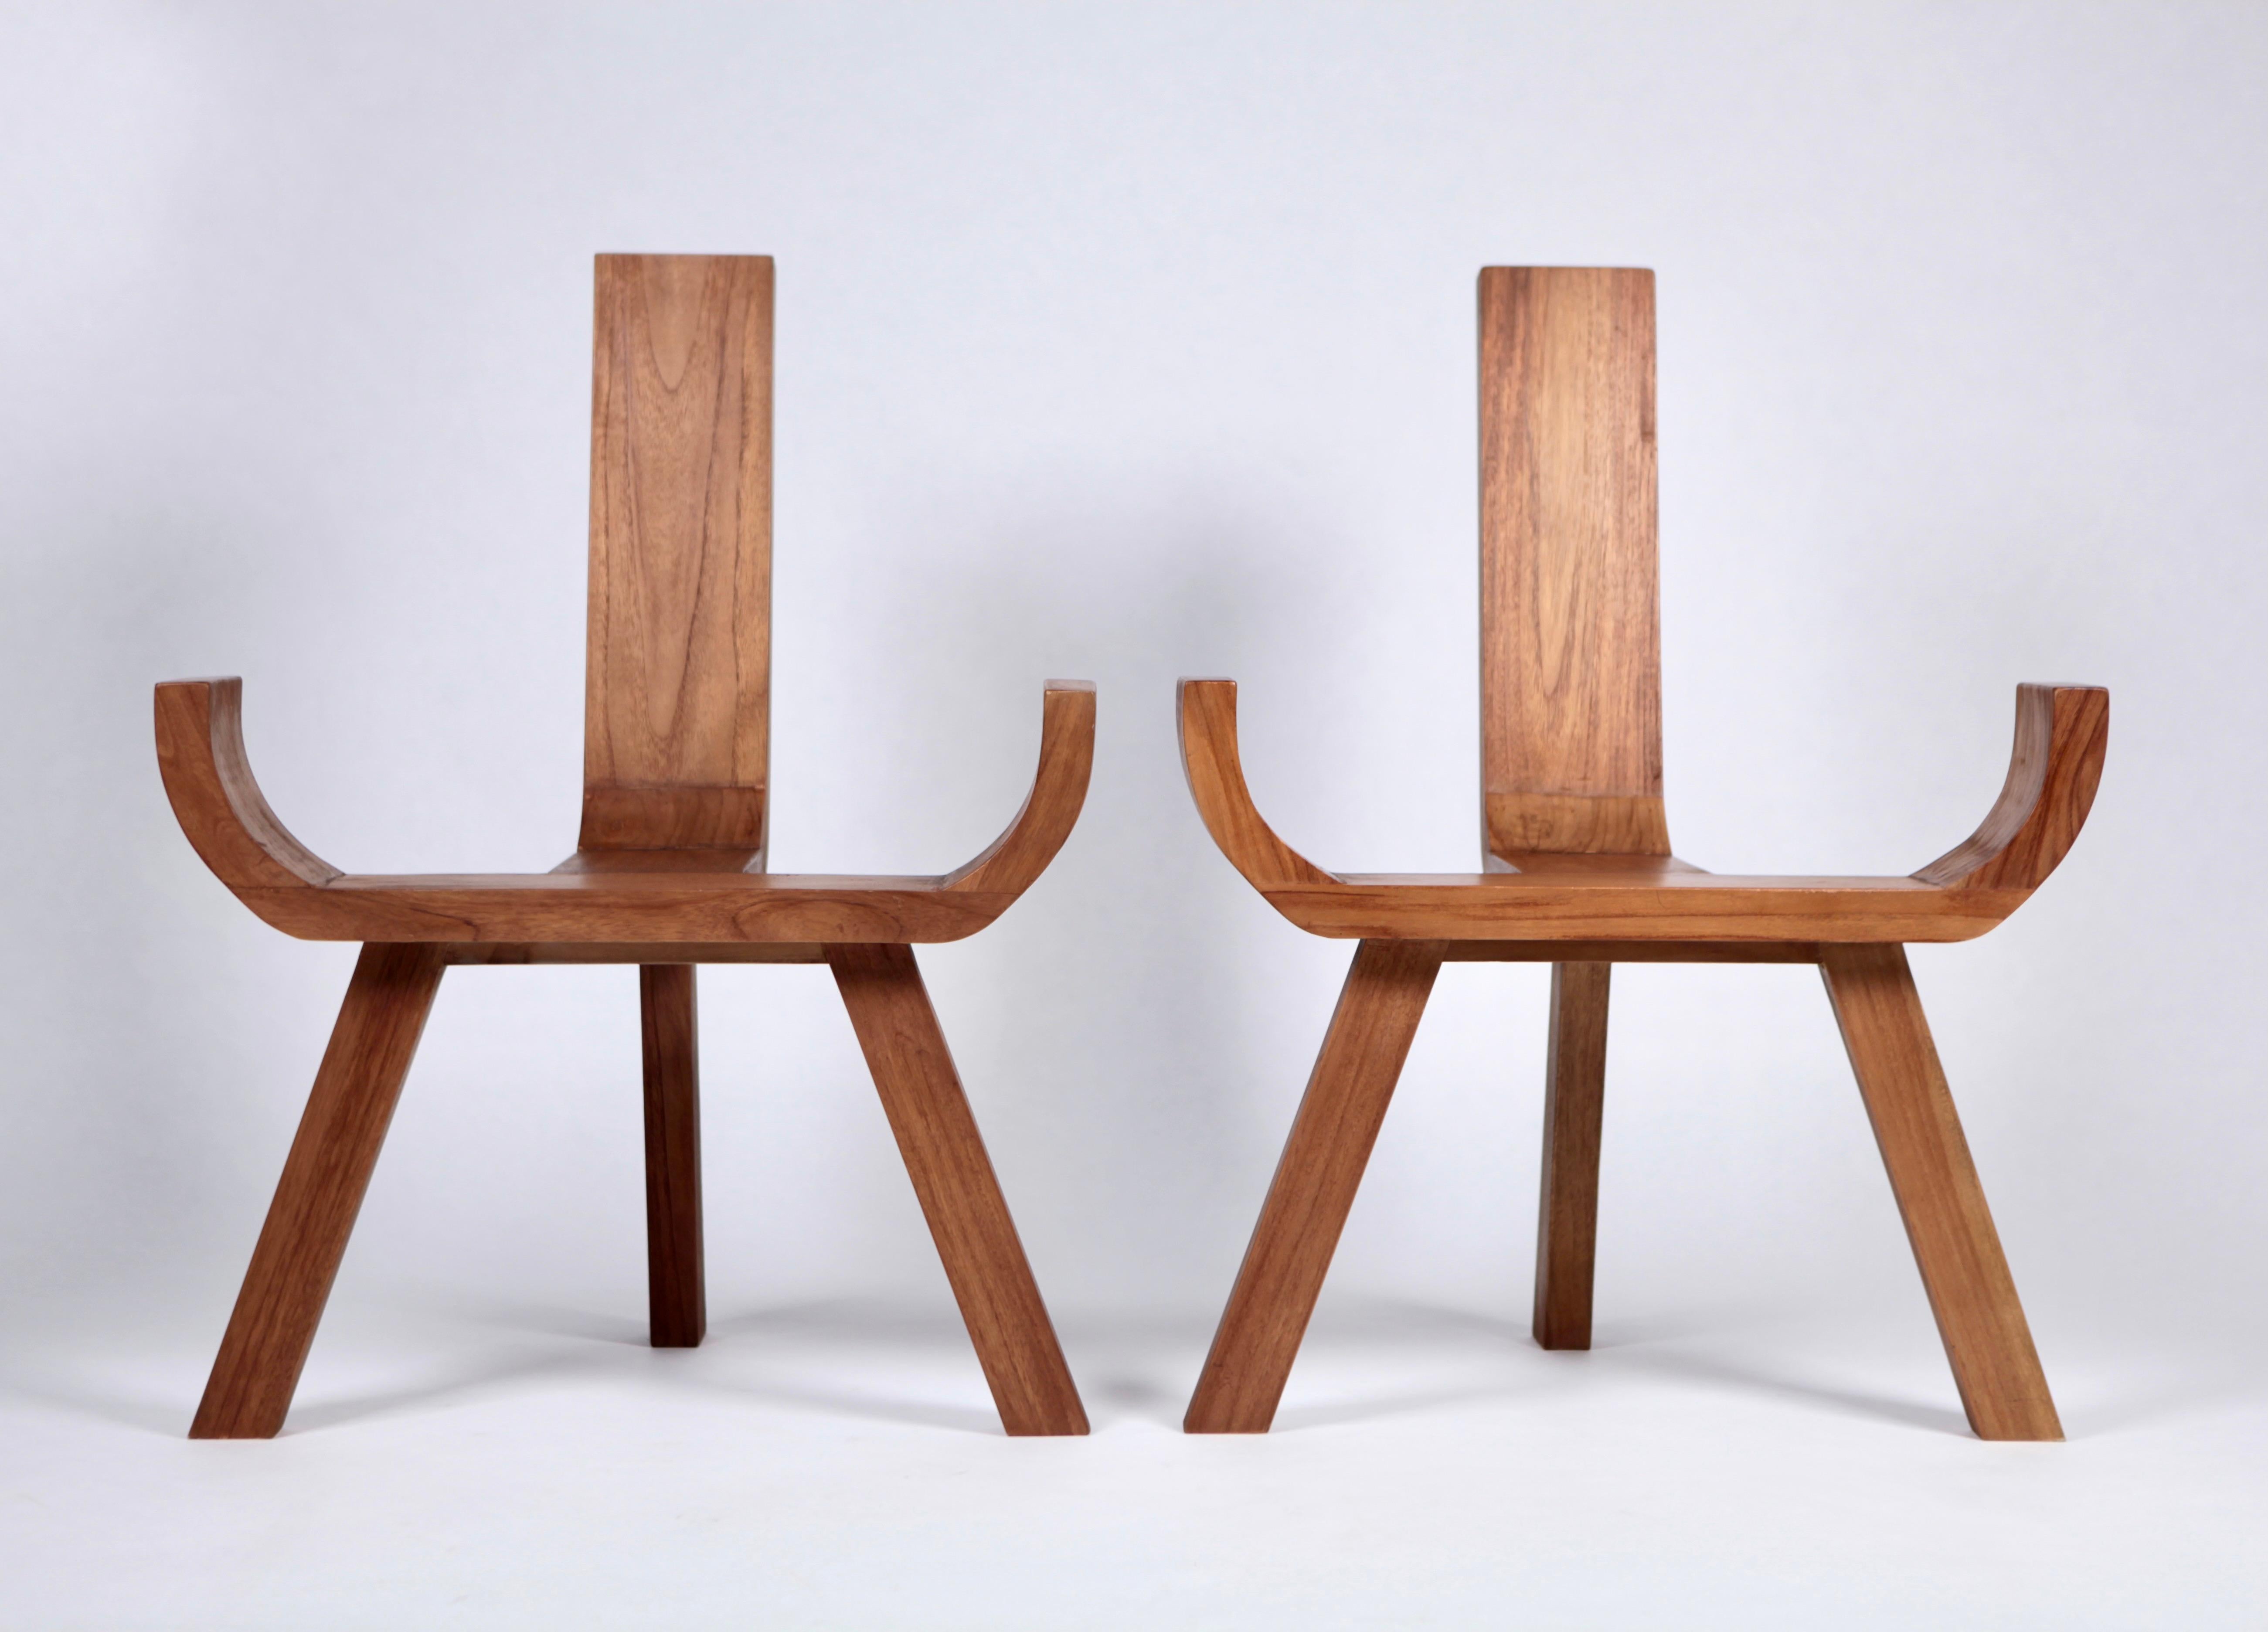 A pair of rare sculptural teak armchairs, Danish work from the 1960s.
Absolute eye catcher and quite comfortable.
Excellent vintage condition.